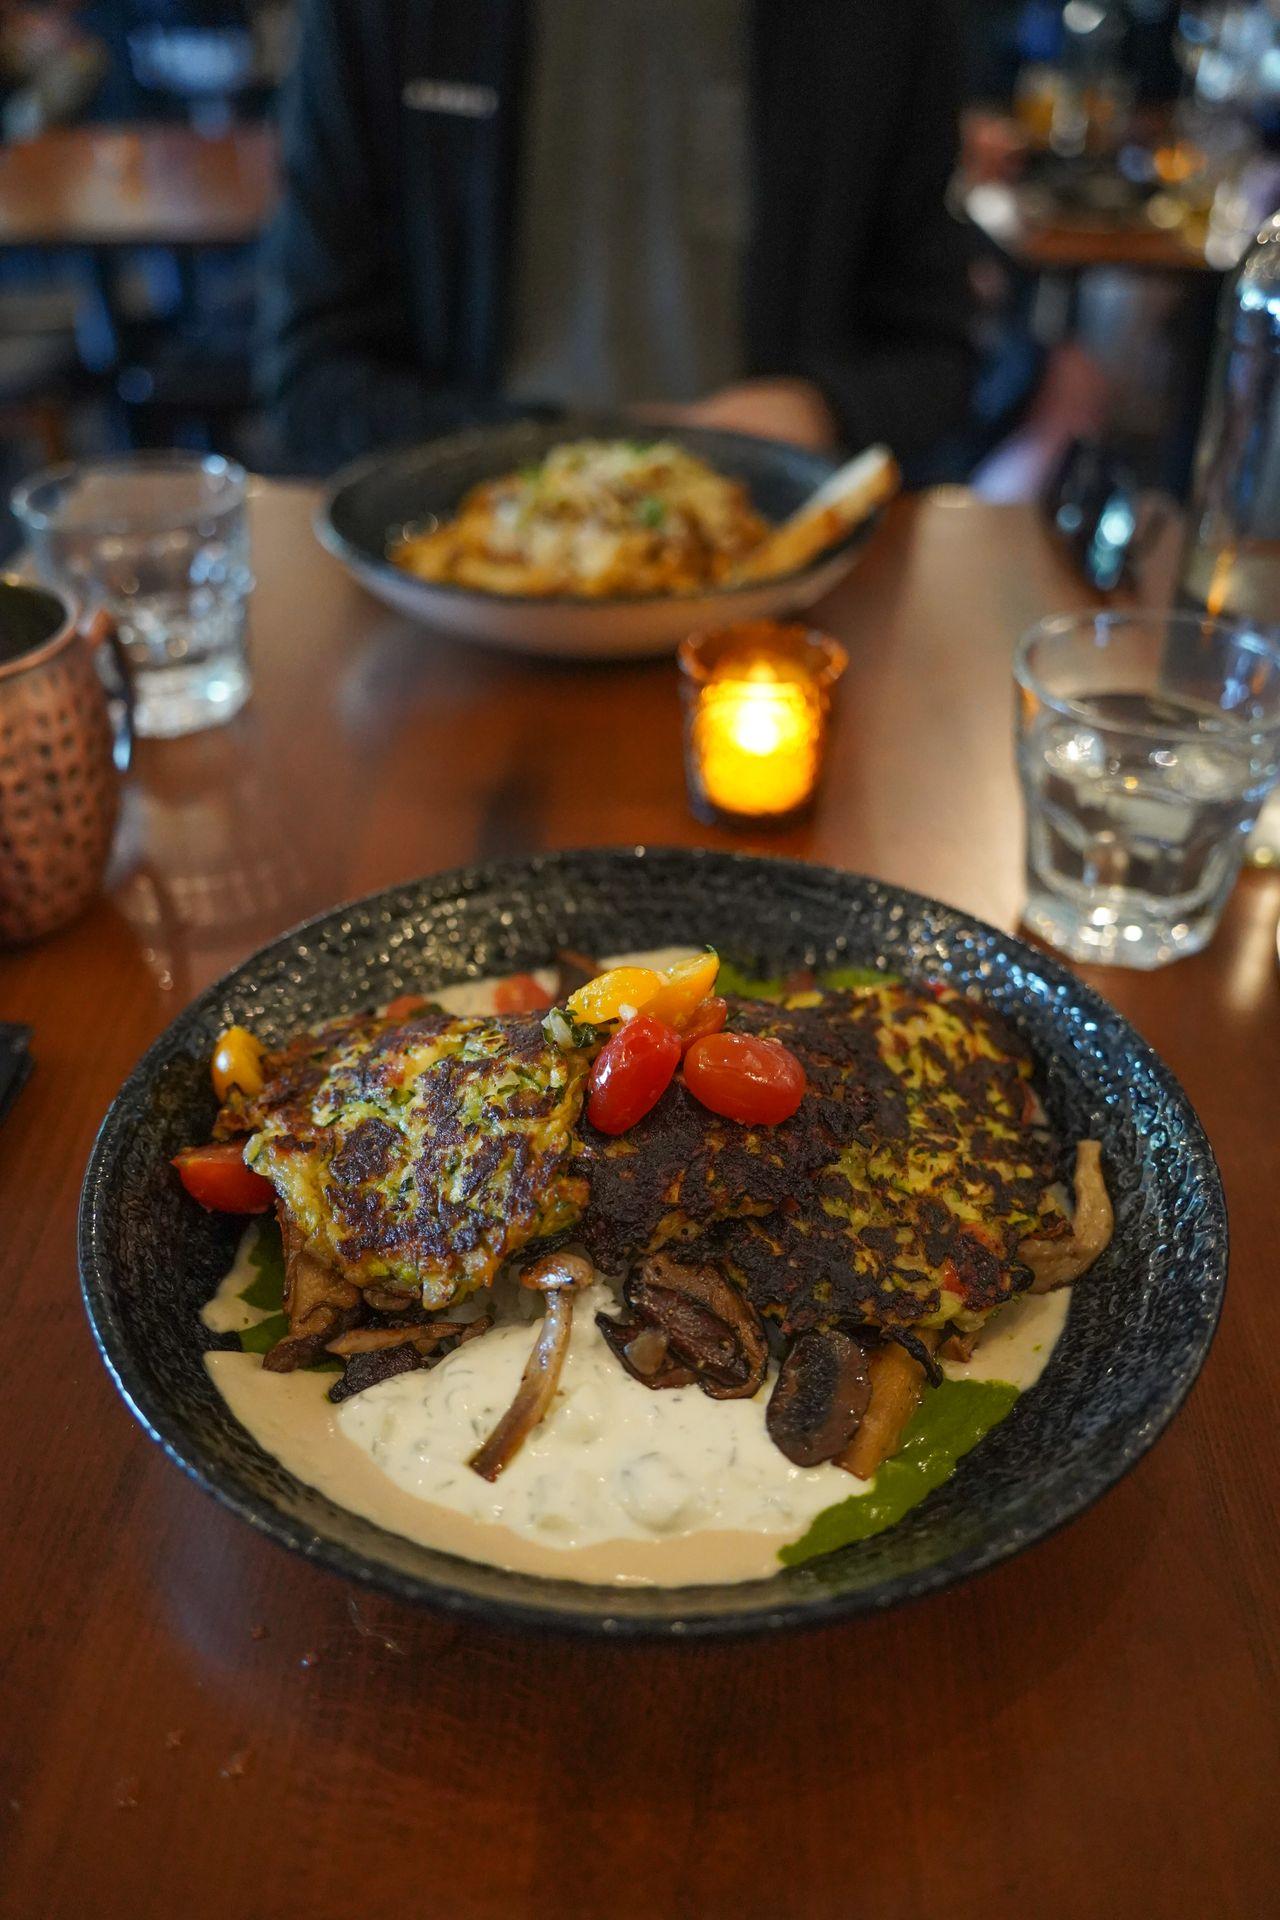 A plate with zucchini cakes, cherry tomatoes and sauce at the Bohemian Bar & Bistro